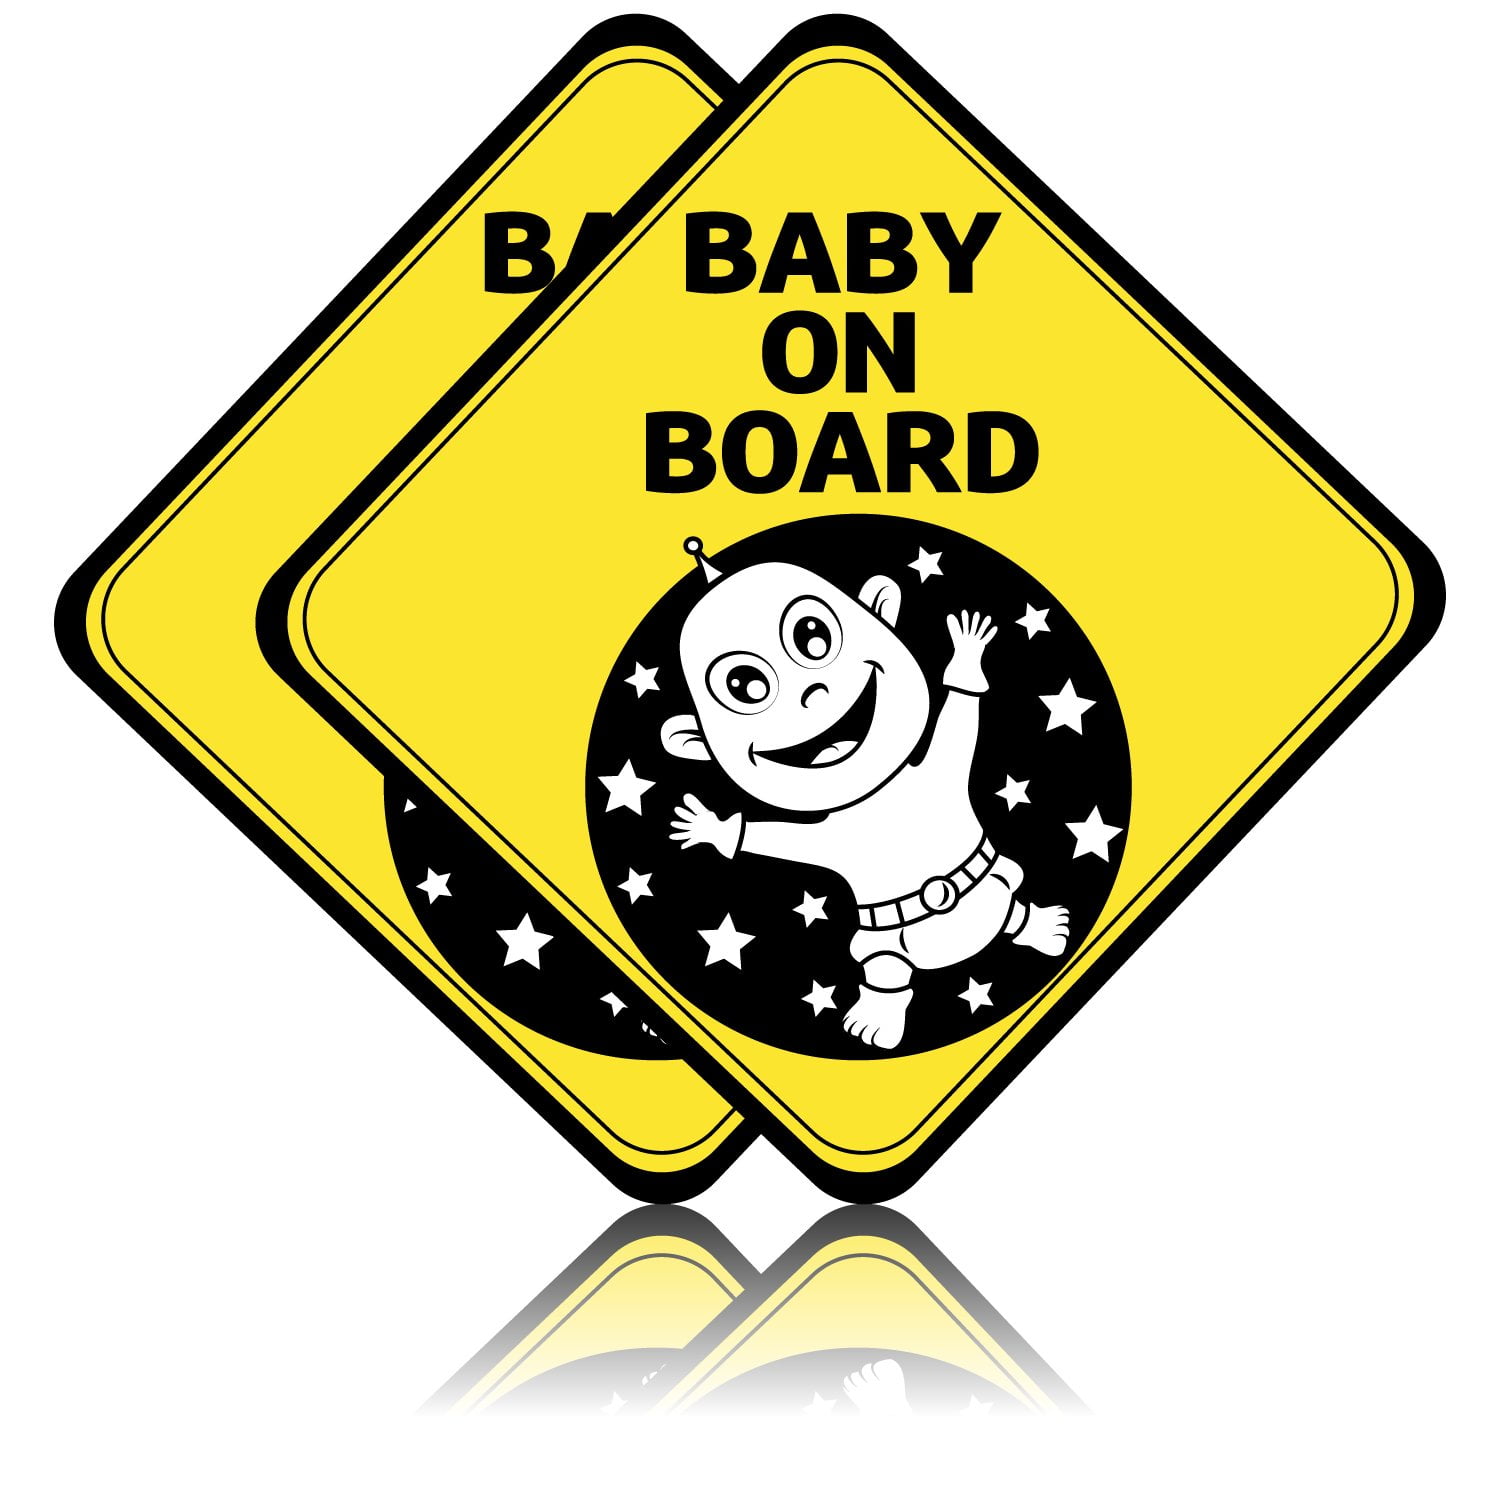 Reflective Waterproof car Sticker Baby ON Board Sticker Removable Safety Sticker Notice Board Cute Baby Window Car Sticker On Board Stickers 2 Pieces Baby in Car Stickers Sign 